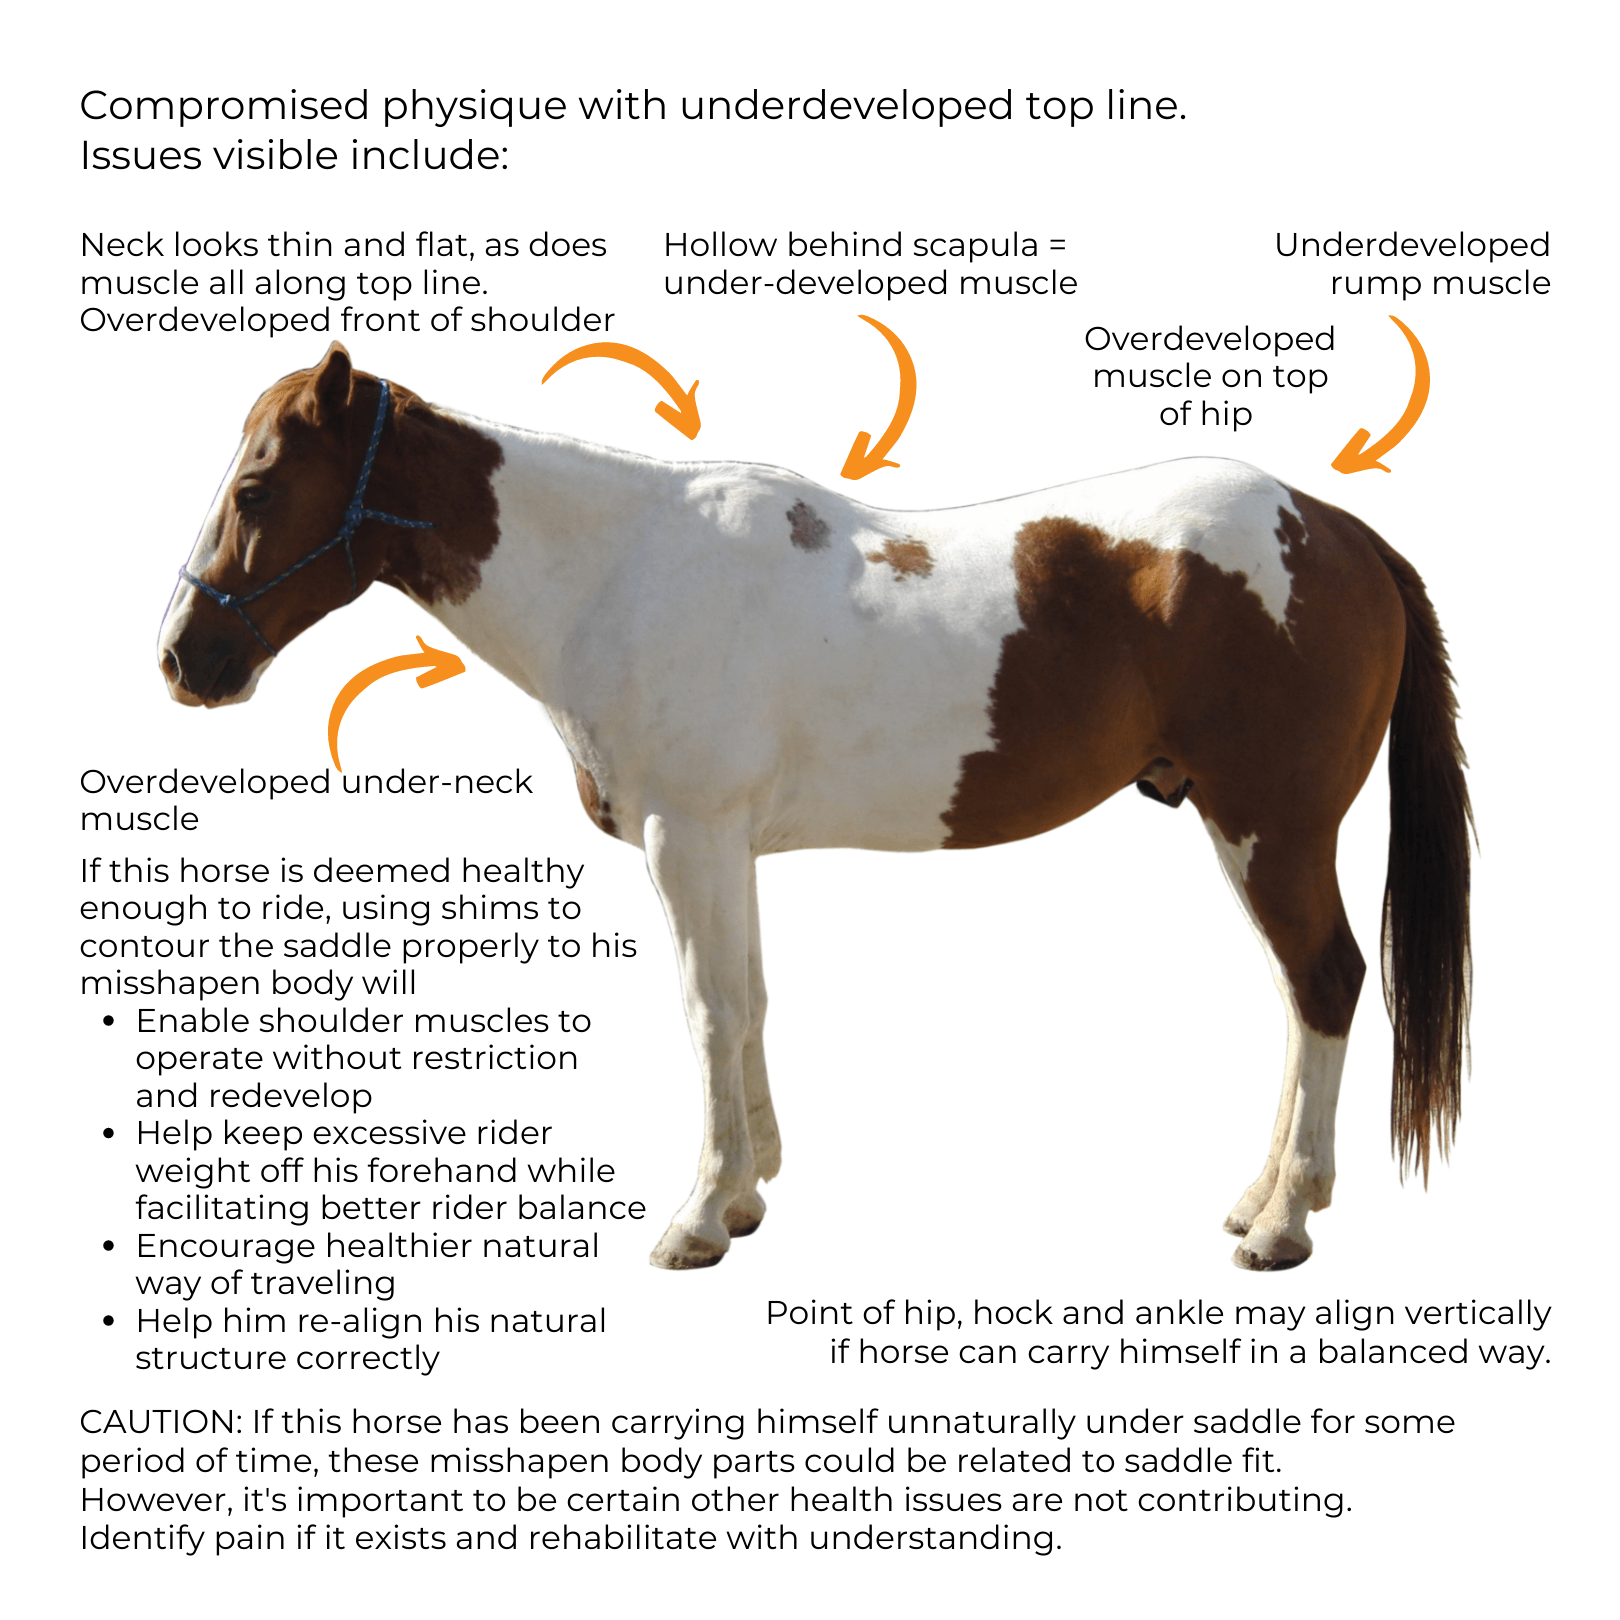 Paint Horse physique compromised